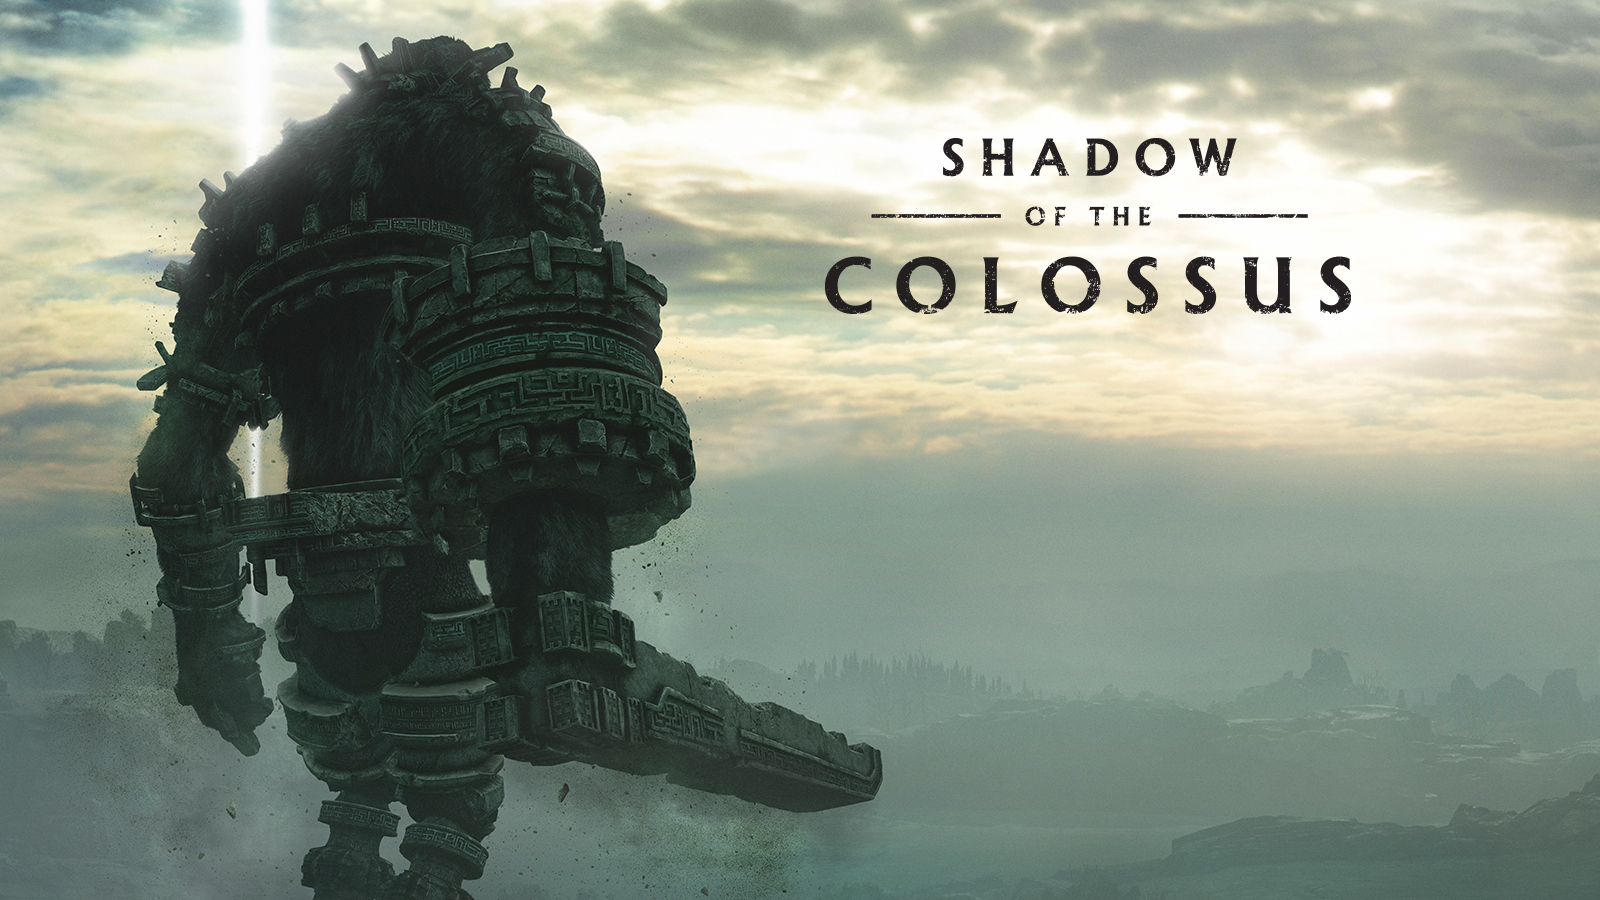 Shadow of the Colossus – Paris Games Week 2017 Trailer